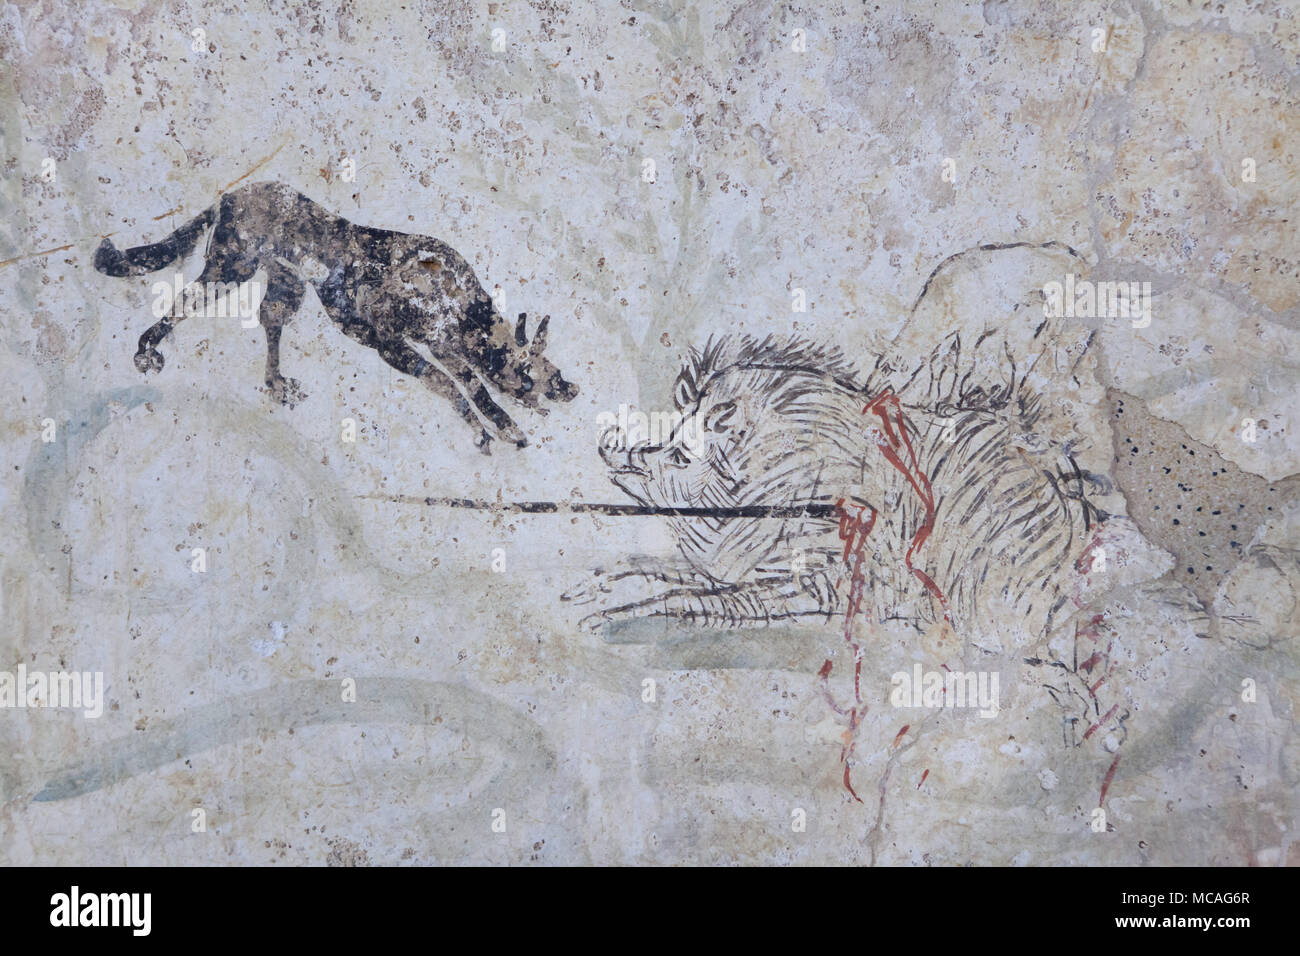 Wild boar hunting depicted in the Lucanian fresco from the 4th century BC on display in the Paestum Archaeological Museum (Museo archeologico di Paestum) in Paestum, Campania, Italy. Stock Photo